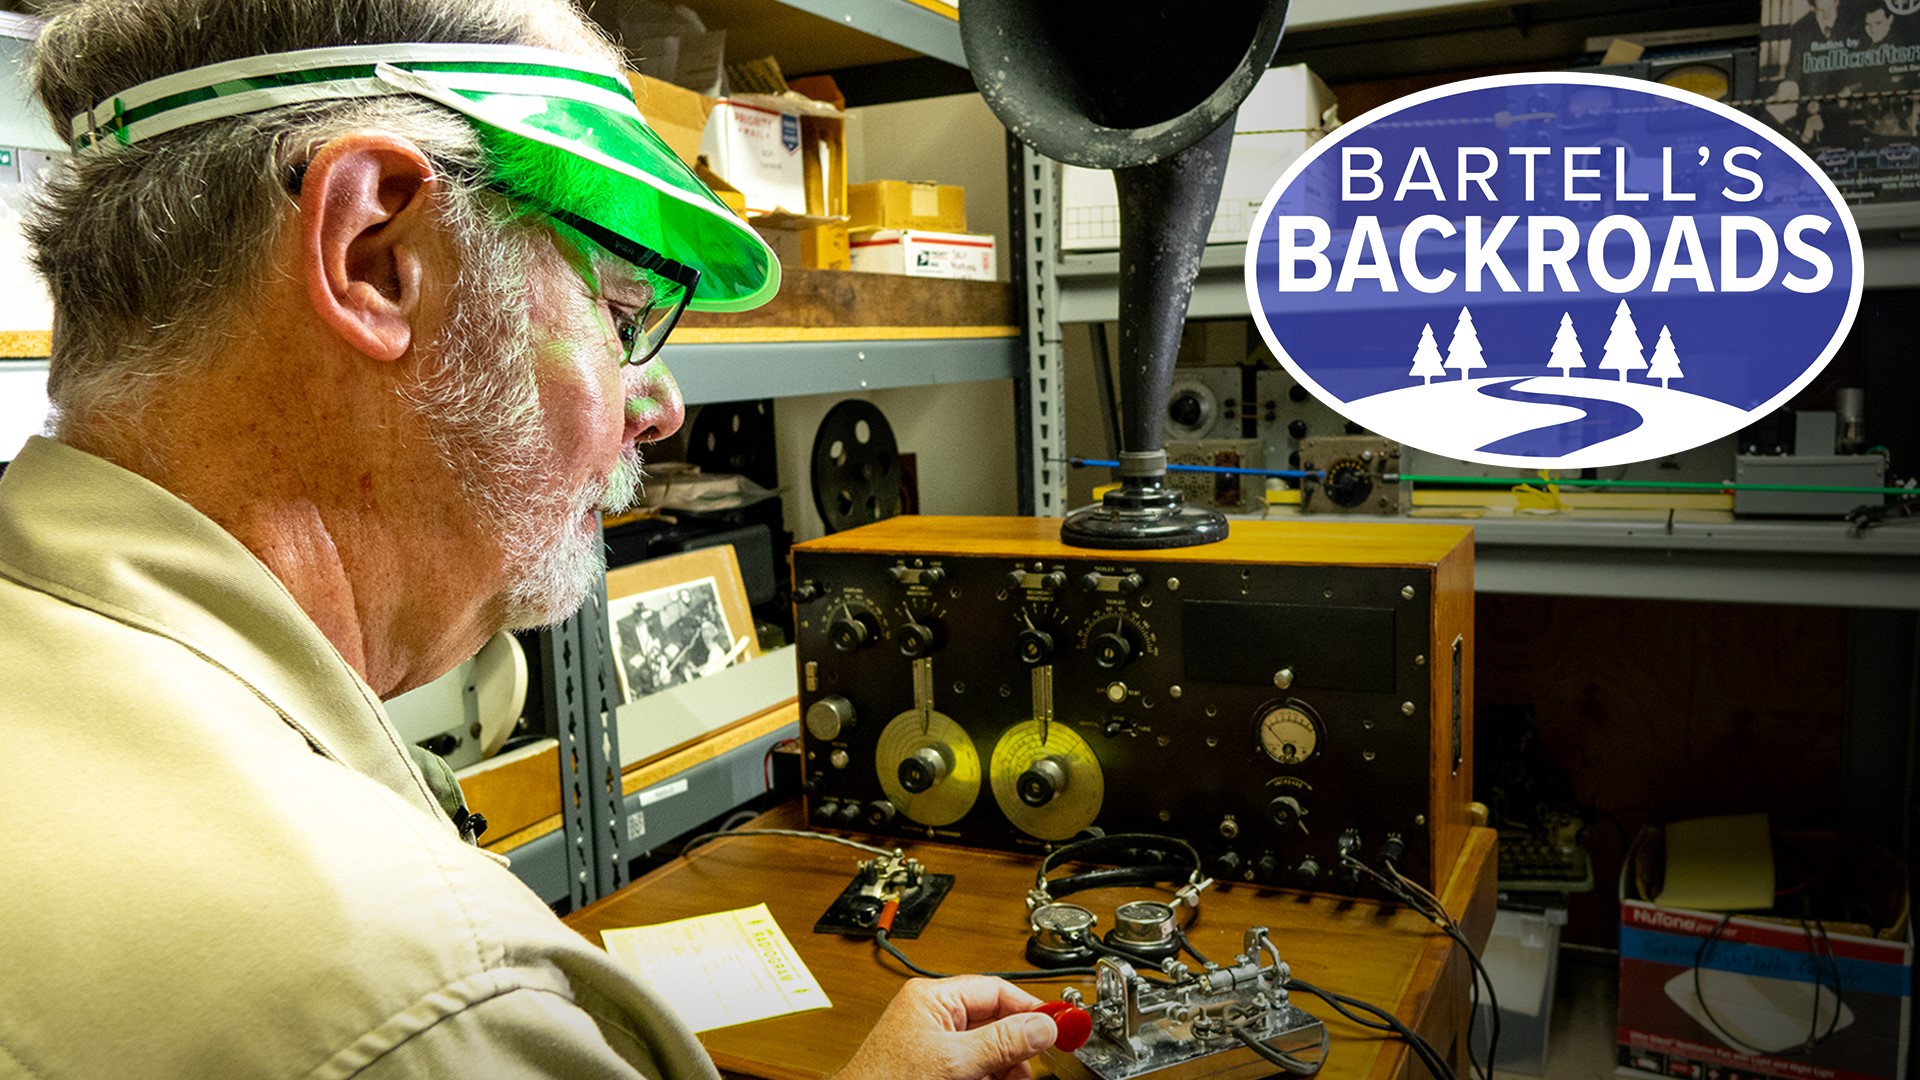 1999 marked the last time a commercial Morse Code message was supposedly transmitted to ships at sea. However, head to Point Reyes, Morse Code is alive and well.